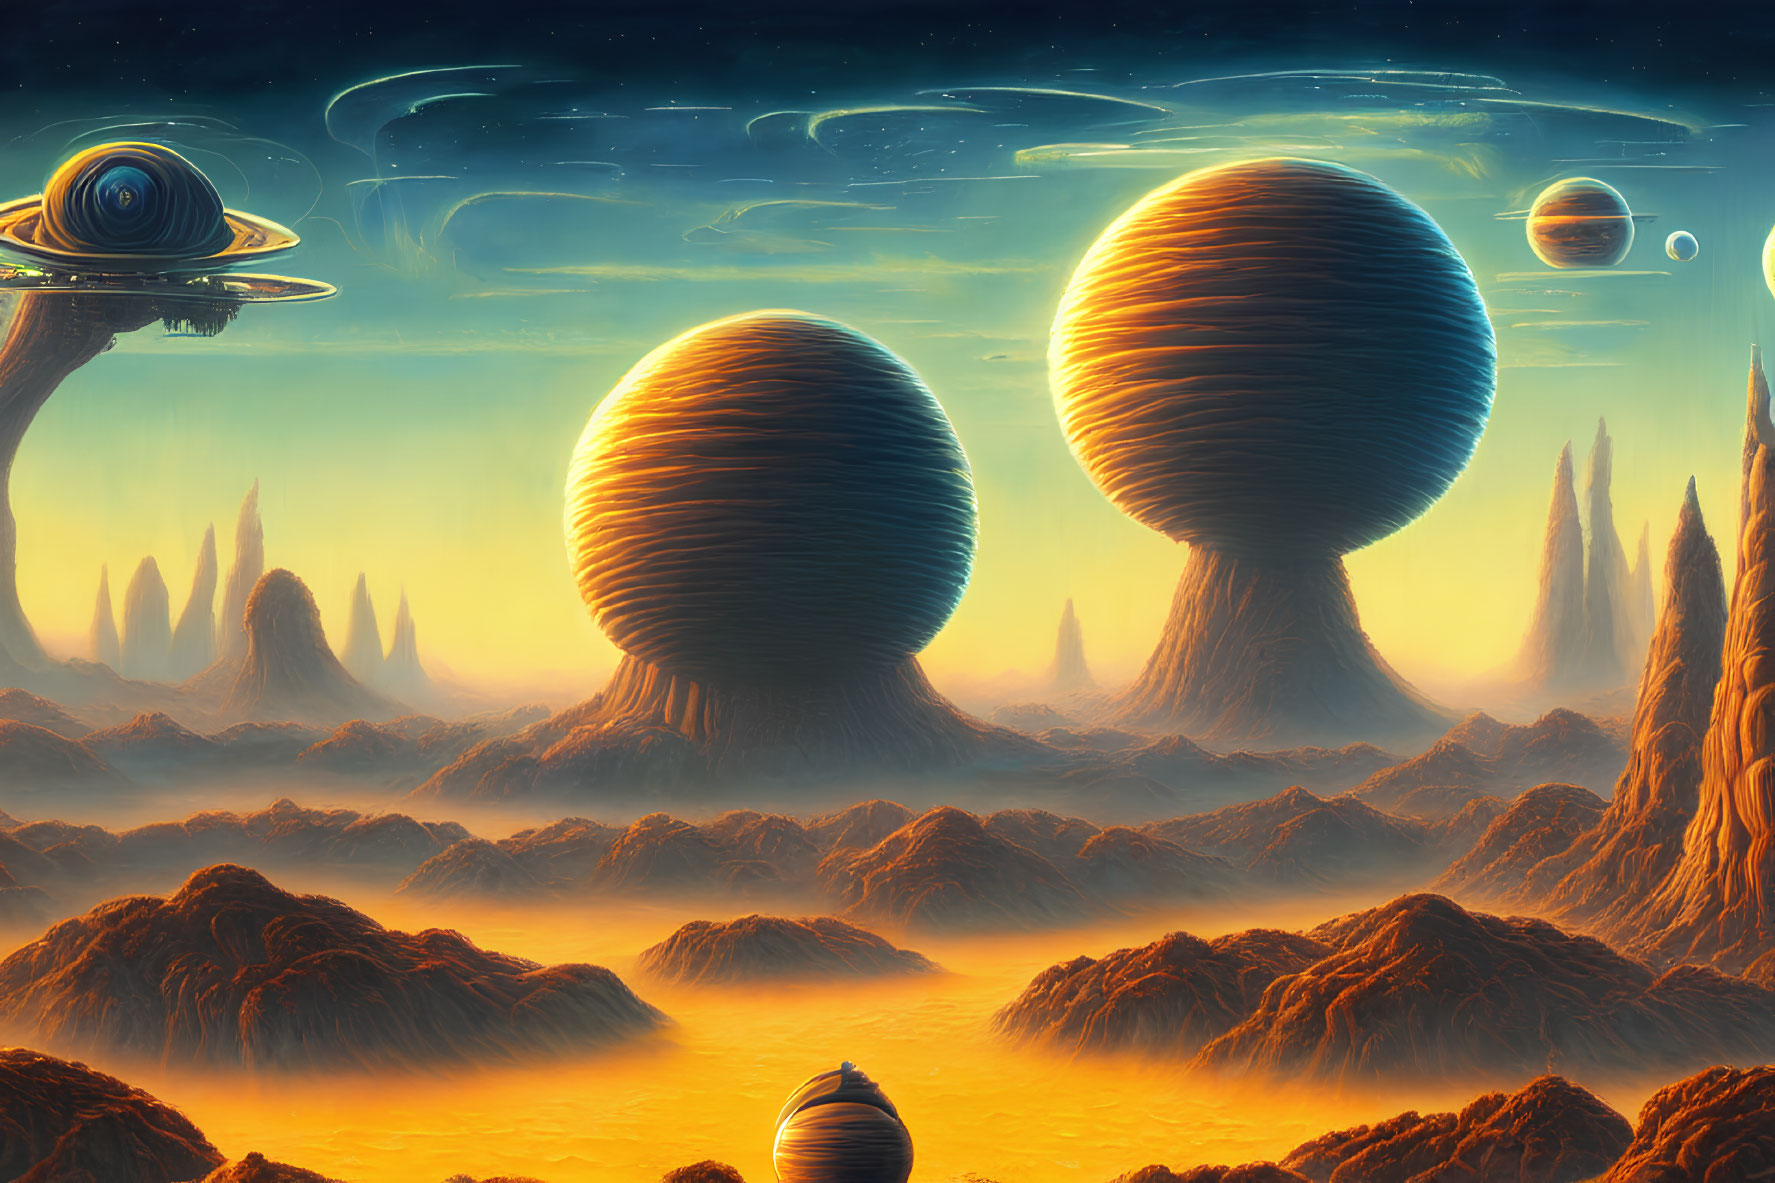 Surreal sci-fi landscape with egg-shaped structures and rocky terrain